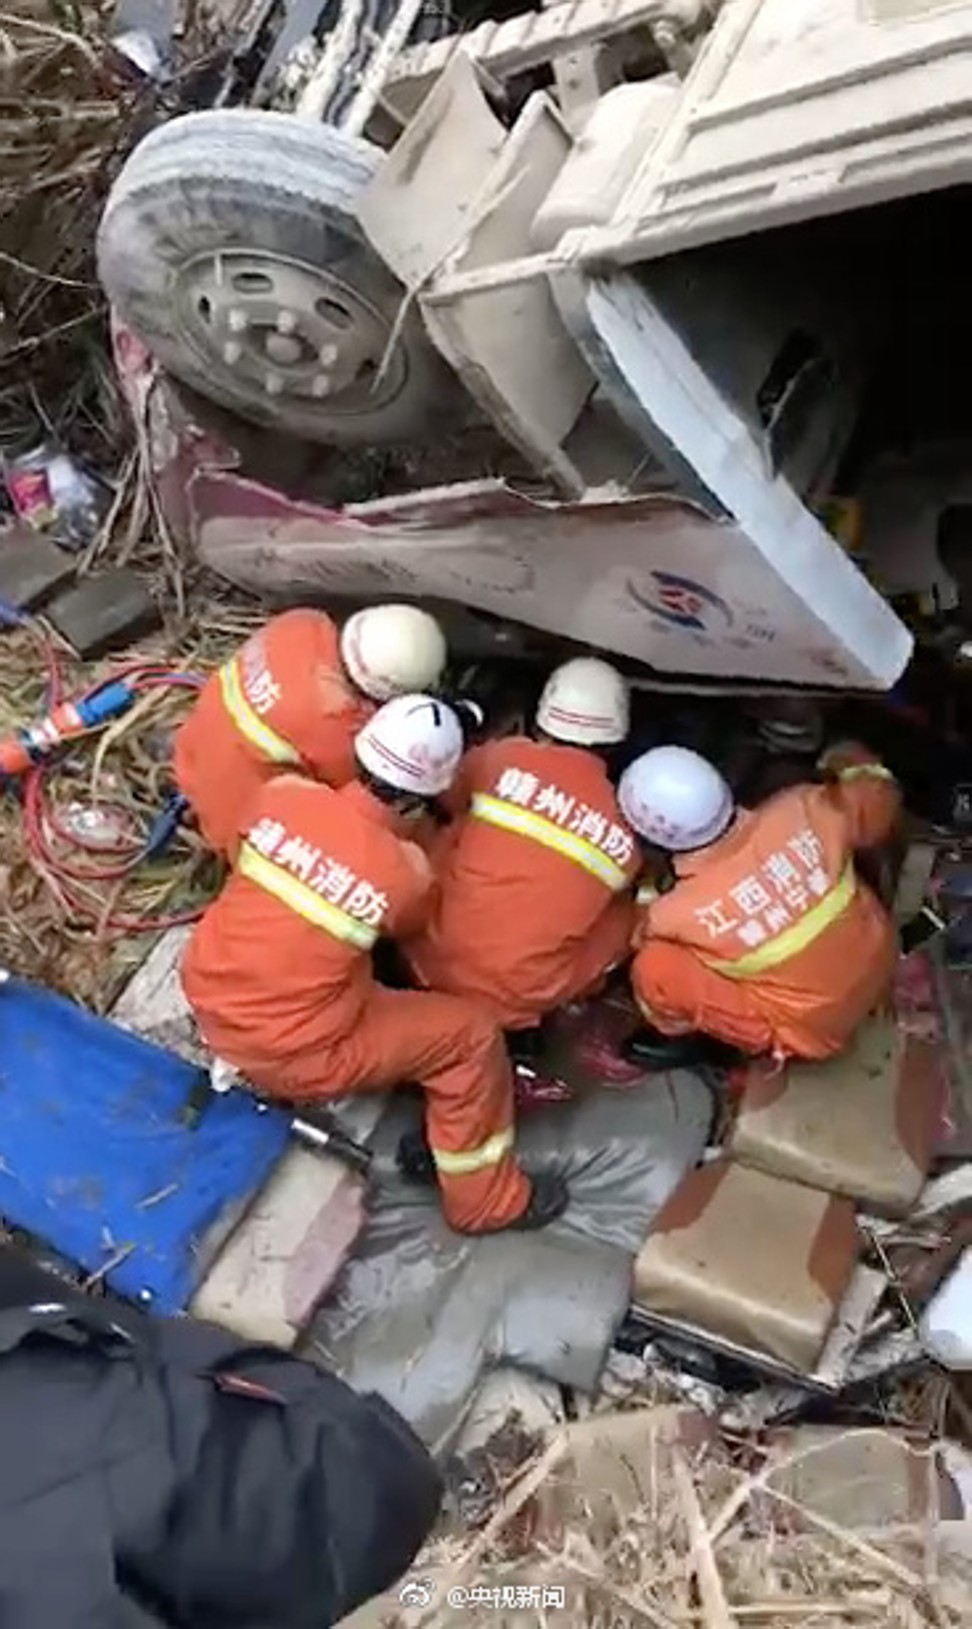 Nine people, including the bus driver, died at the scene of the crash, China’s state broadcaster CCTV said. Photo: Weibo